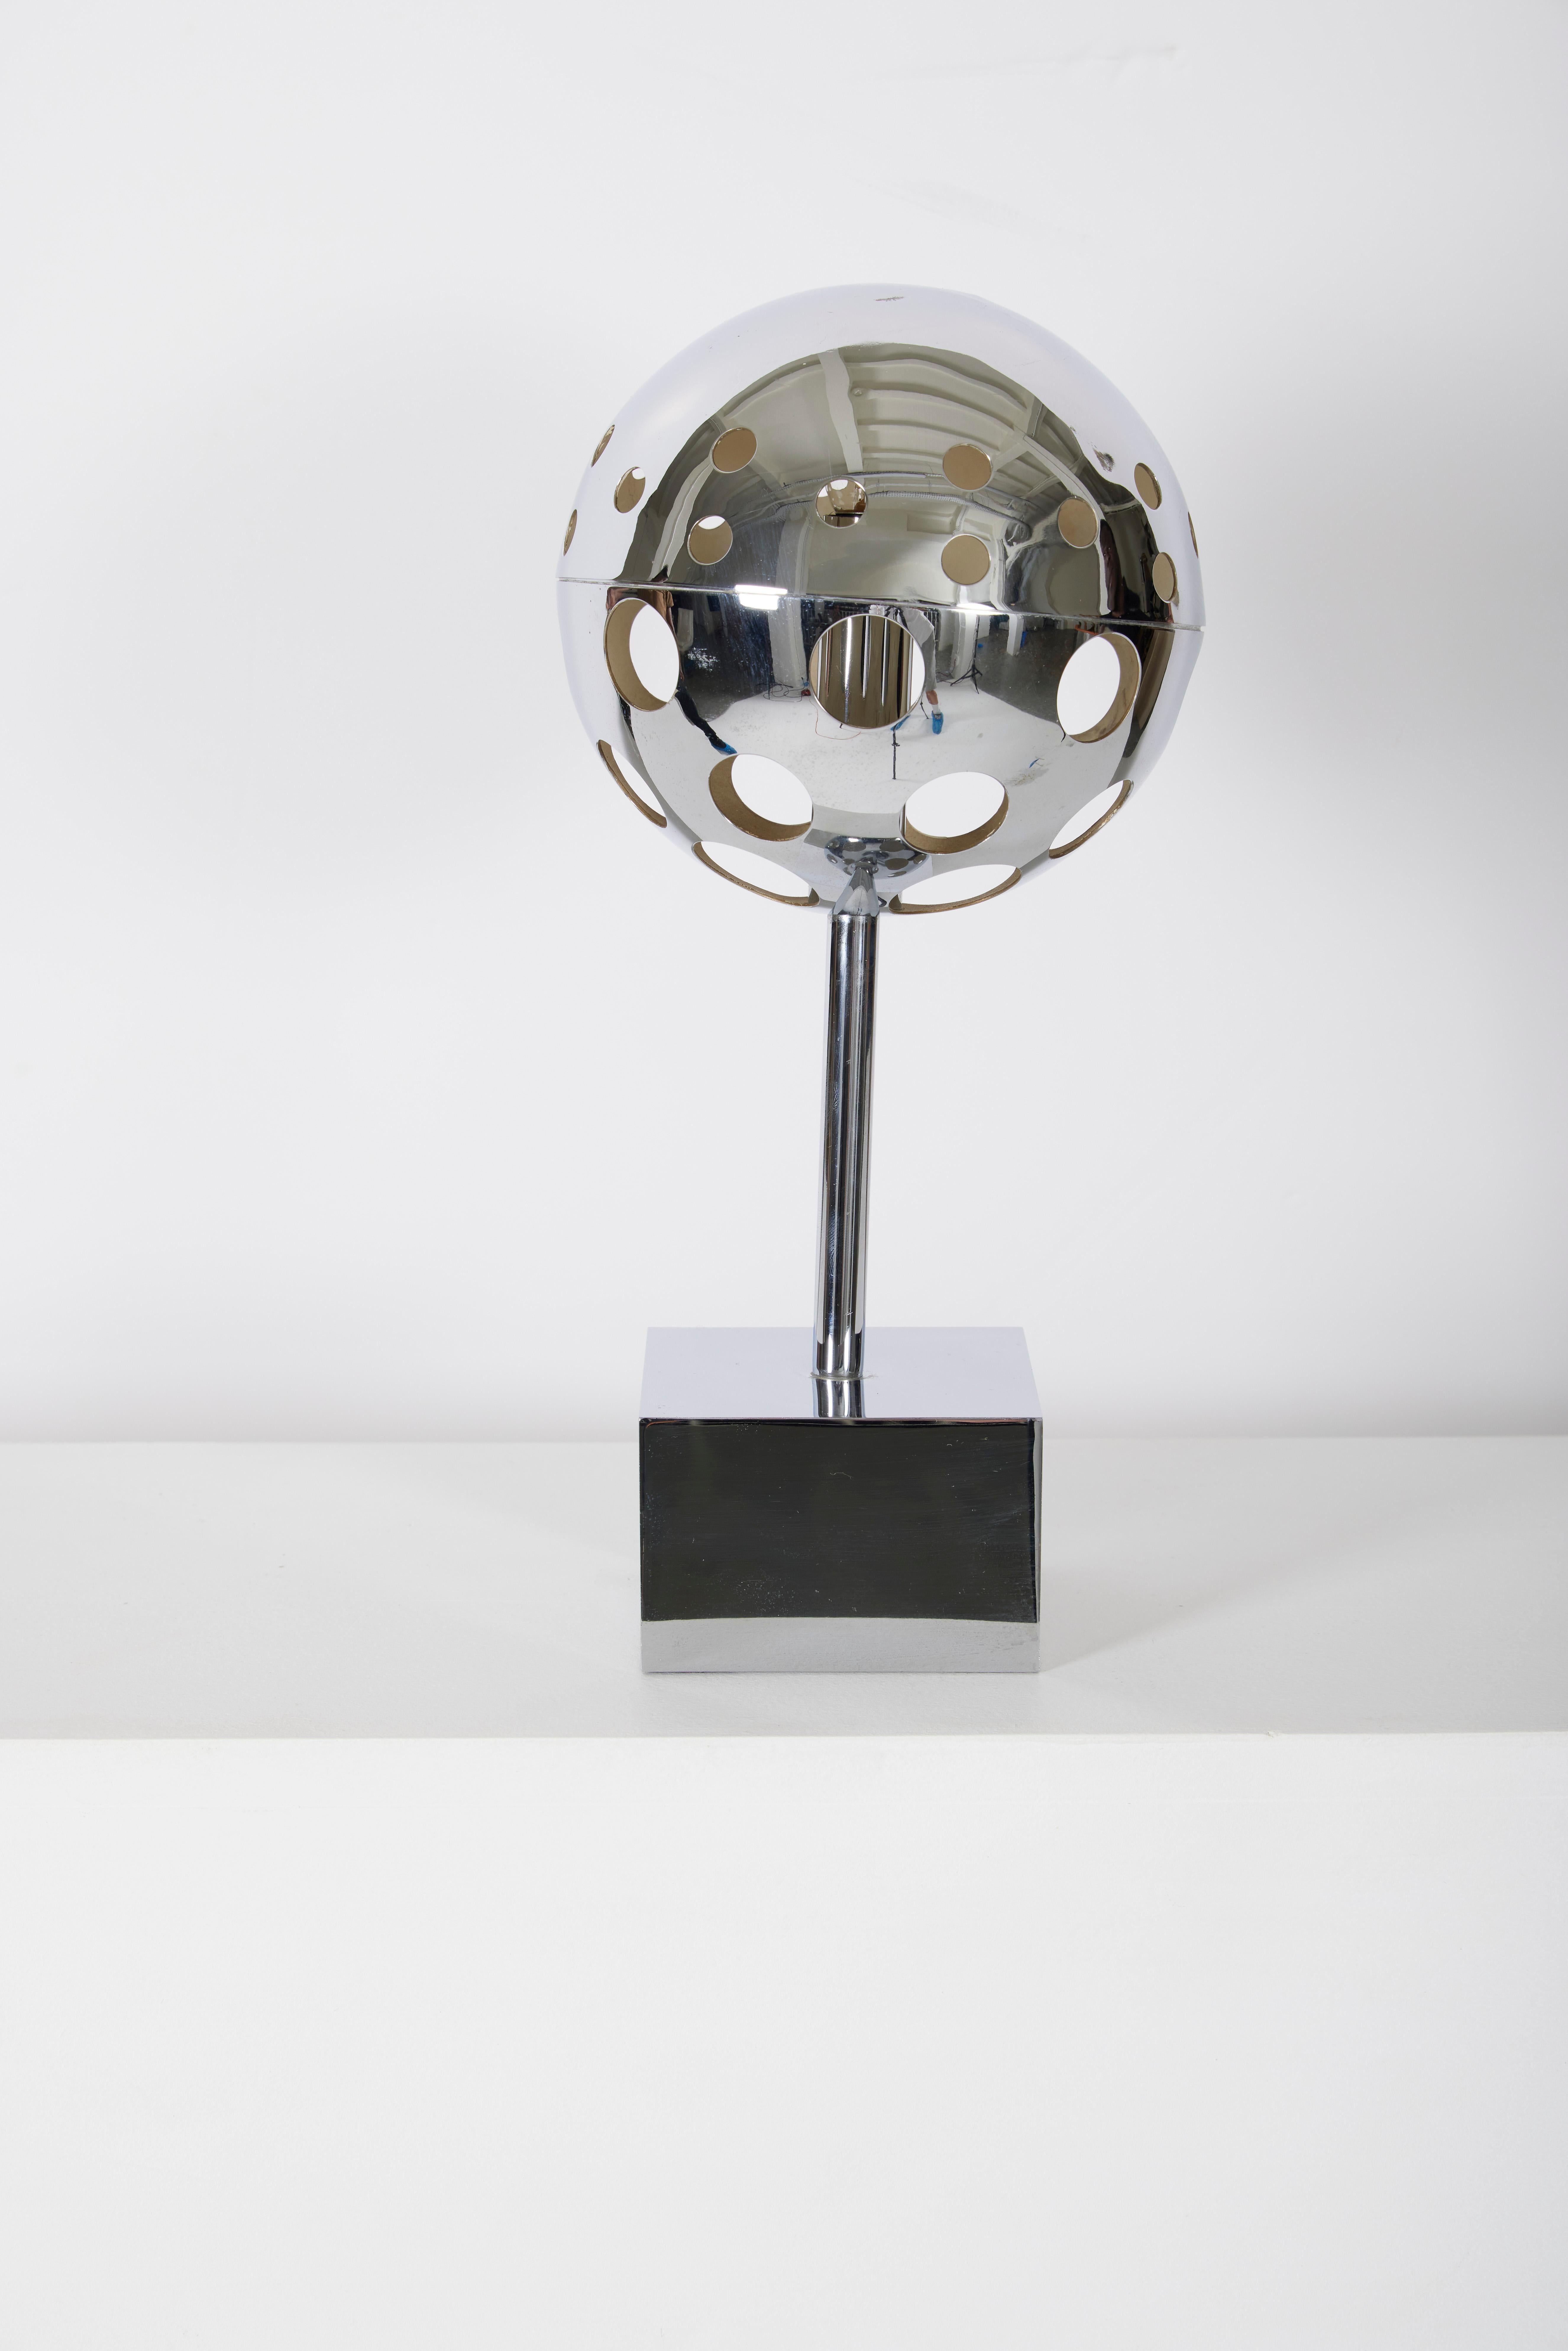 Lamp 10367 by Sabine Charoy, published by Verre Lumière, 1970s. Table lamp in chromed metal, with an openwork sphere on a cubic base. Functional.
LP1107